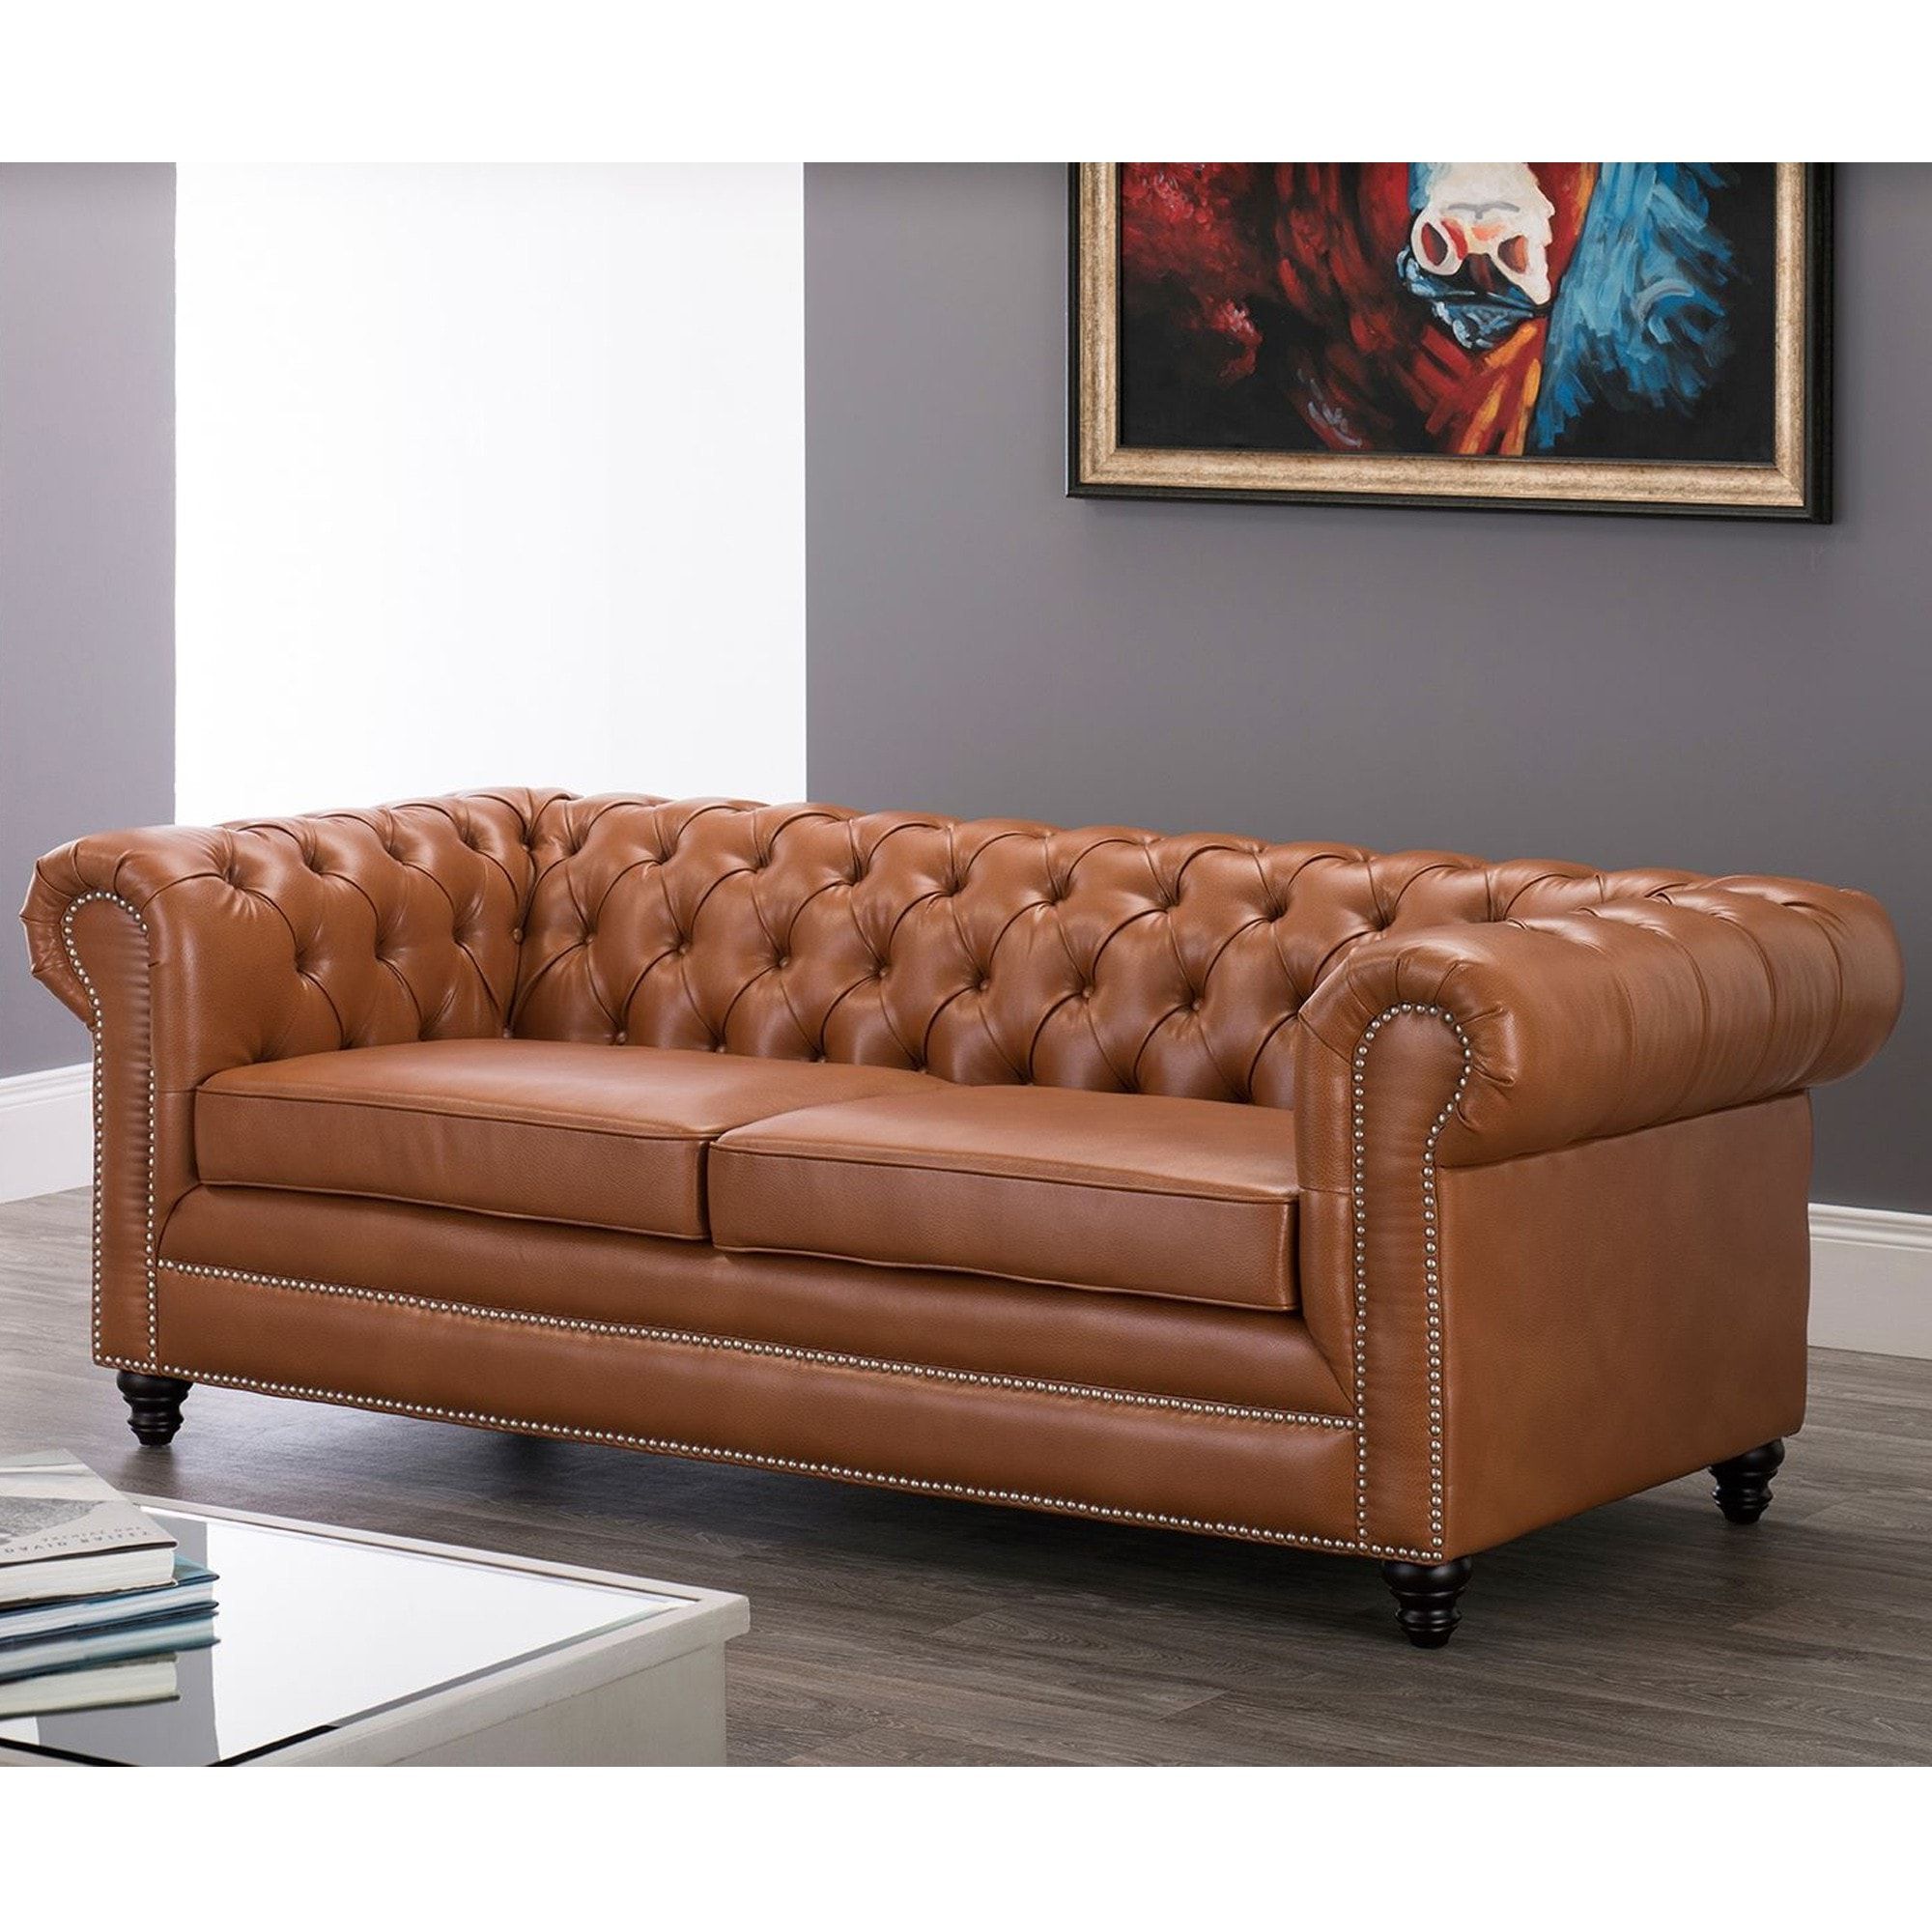 Faux Leather Chesterfield 3 Seater Sofa Tan | Tan Chesterfield Sofa With Regard To Traditional 3 Seater Faux Leather Sofas (View 3 of 20)